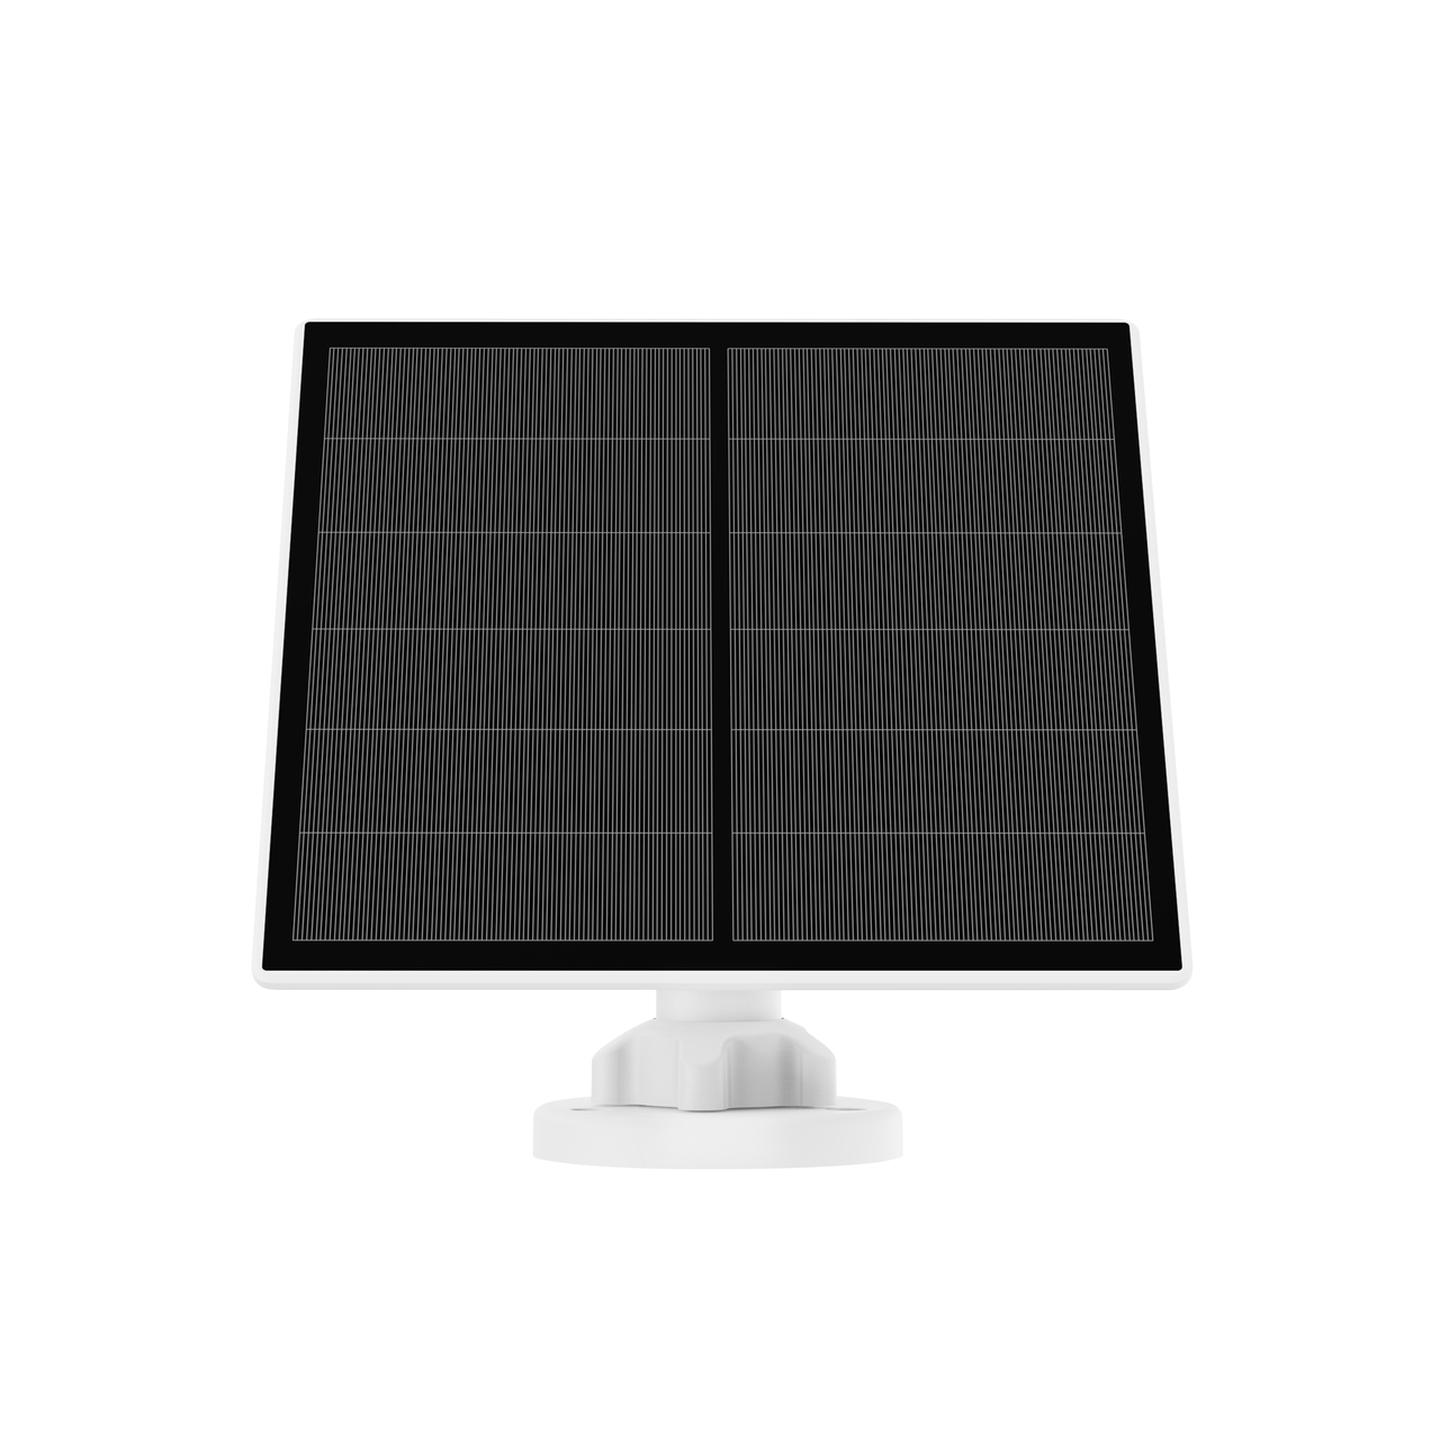 Concord Solar Panel to Suit Wi-Fi Battery Powered Cameras  QC3910/QC3912